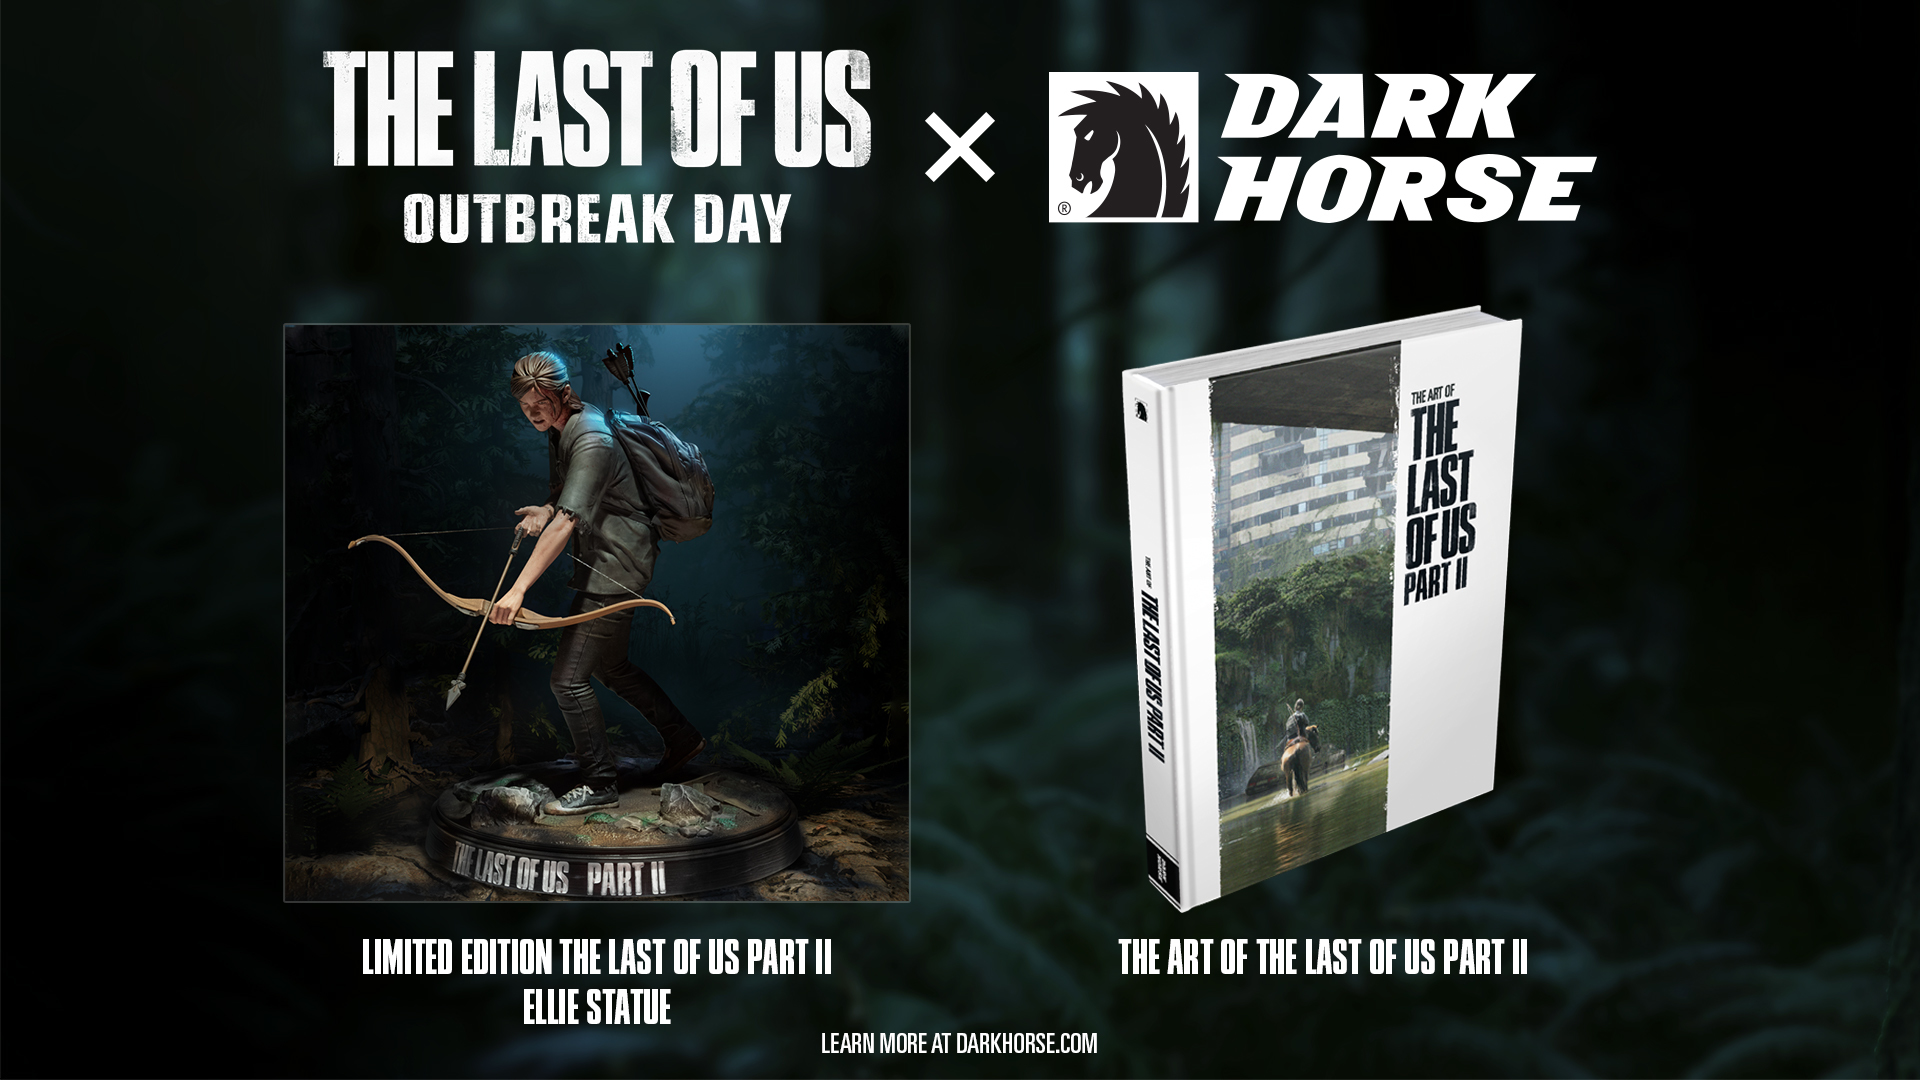 Naughty Dog The Last of Us Part II Outbreak Day 2019